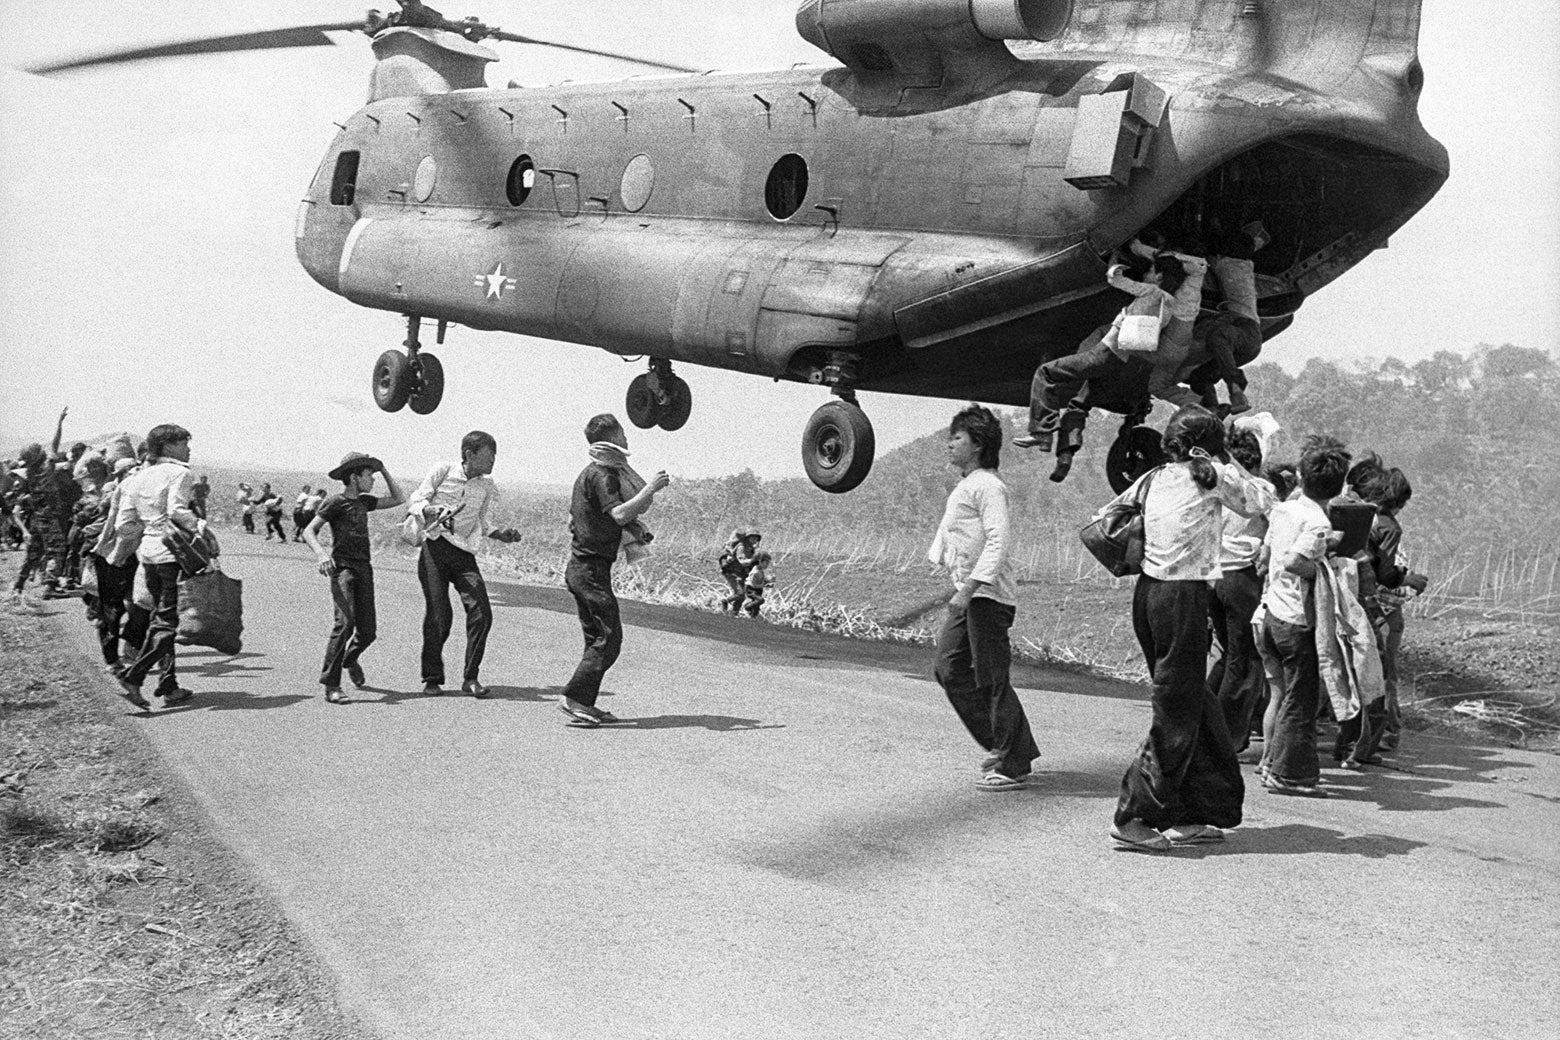 Vietnamese refugees stand on a runway as a U.S. helicopter hovers overhead with three people hanging from the back